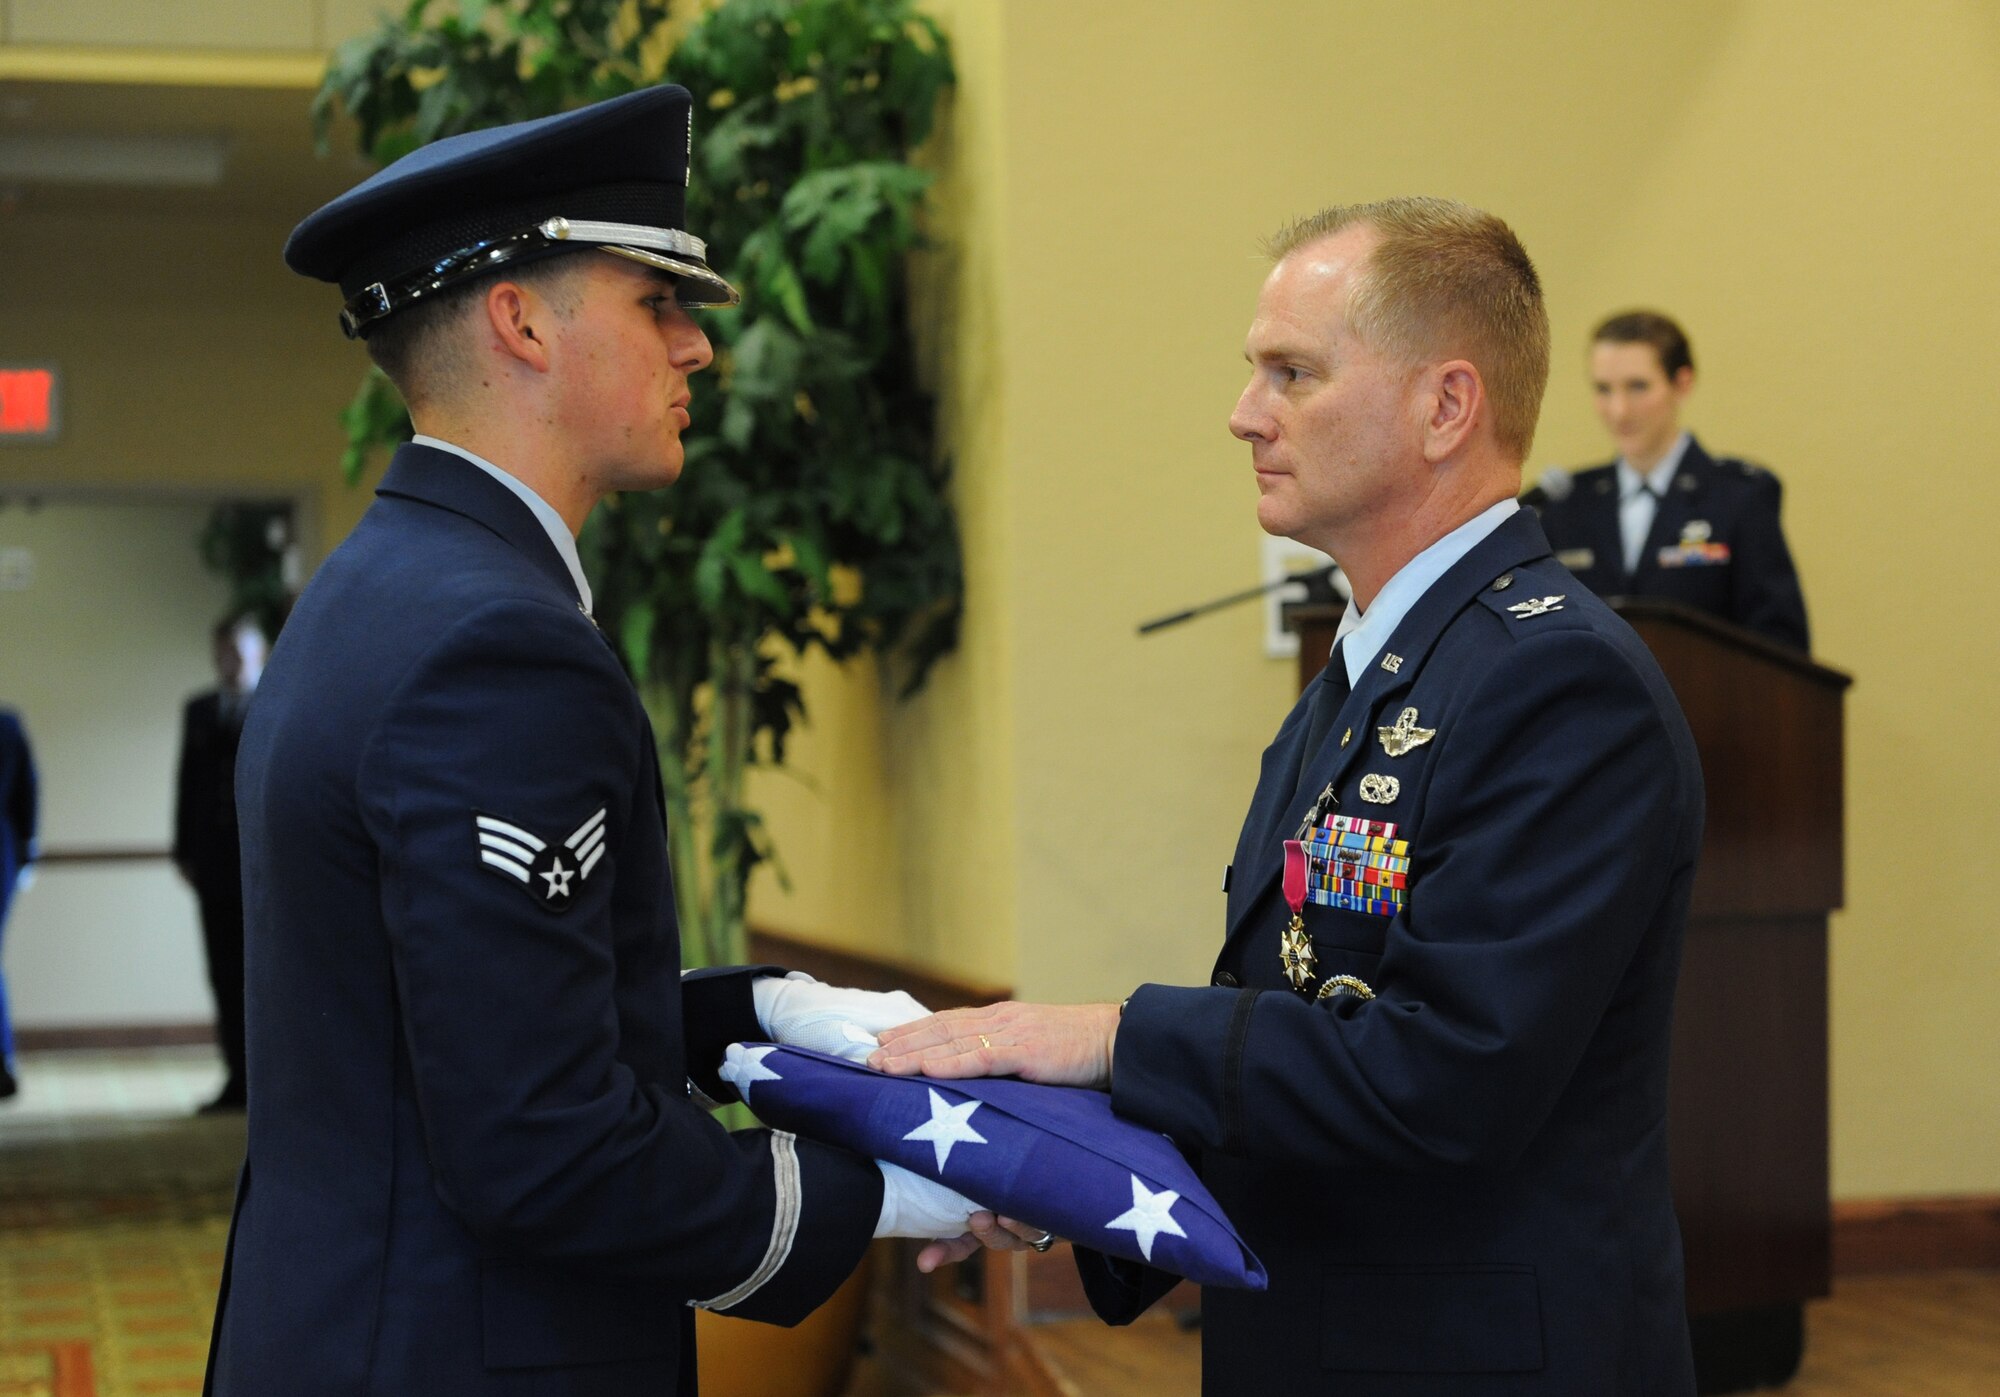 Senior Airman Dylan Anderson, Keesler Honor Guard member, presents the U.S. flag to Col. Dennis Scarborough, 81st Training Wing vice commander, during his retirement ceremony at the Bay Breeze Event Center June 28, 2016, on Keesler Air Force Base, Miss. Scarborough retired with 27 years of military service. He has served multiple tours as an F-15C instructor and evaluator and has held positions in the fields of defense policy, operational plans, safety and aircraft maintenance. He has commanded at the squadron level and served as an operations group deputy commander. (U.S. Air Force photo by Kemberly Groue/Released)